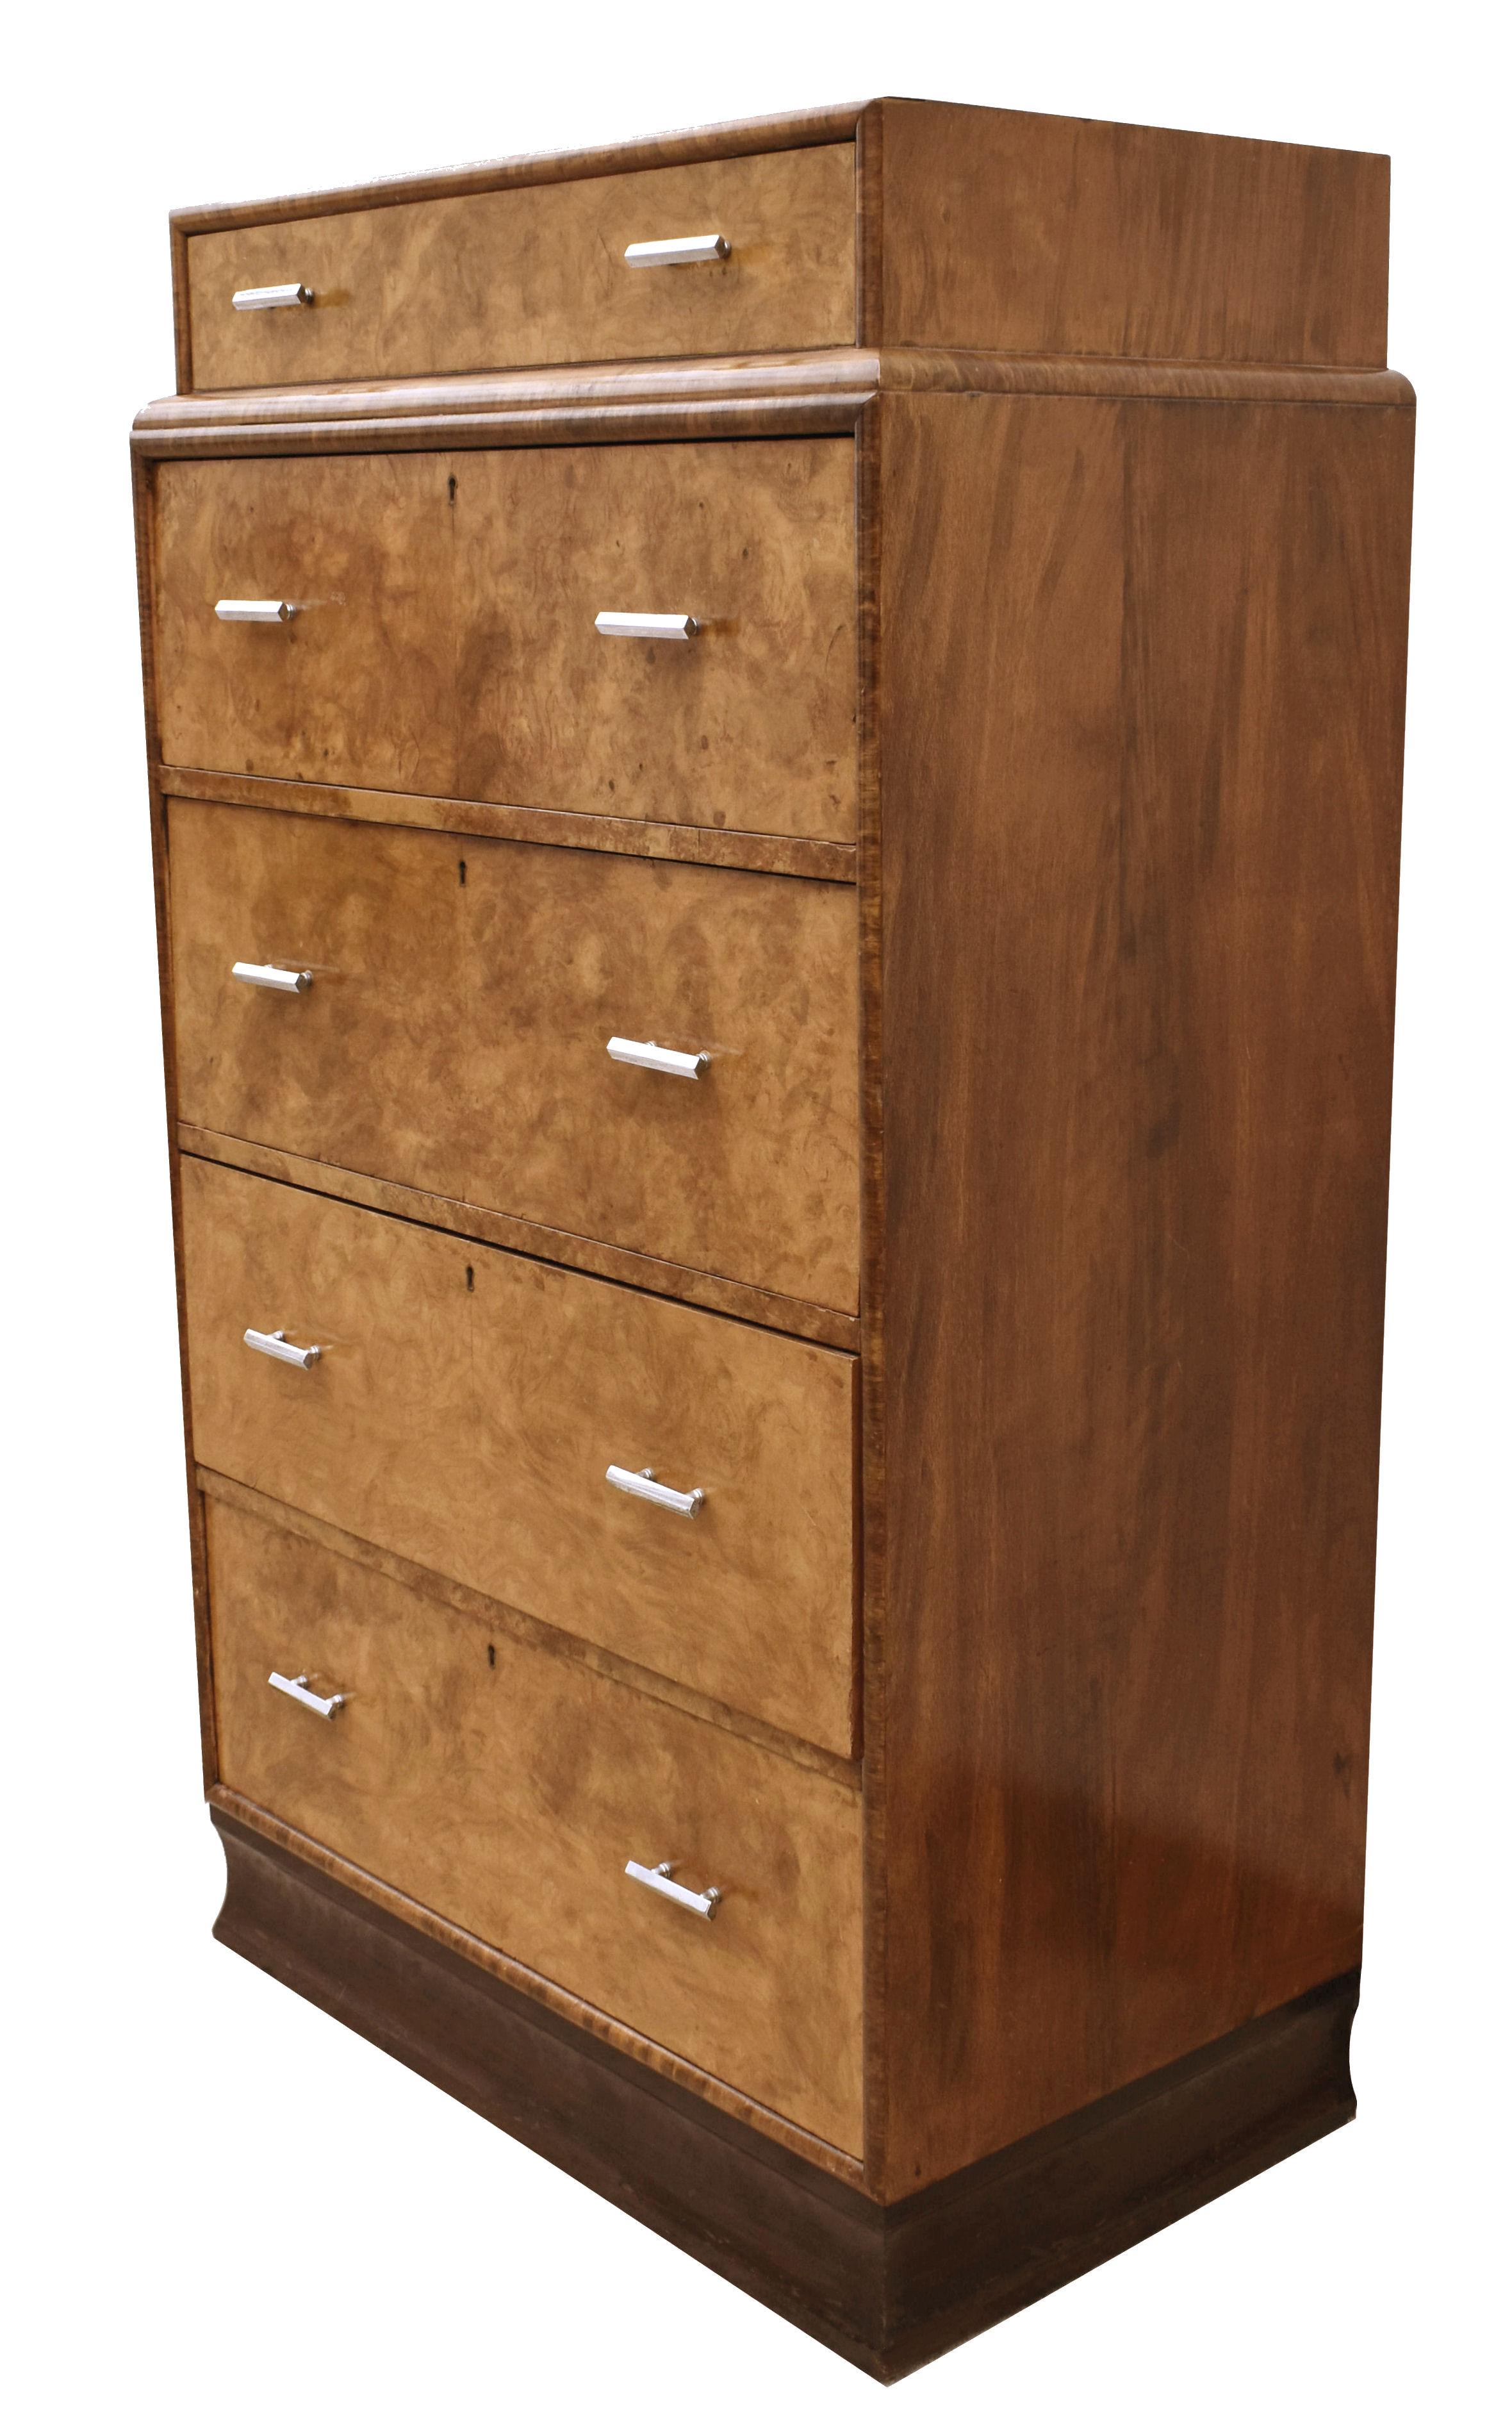 For your consideration is this very stylish and beautifully figured Walnut original Art Deco chest of drawers which dates to the 1930's. Five generously sized drawers which are veneered in mid tone figured walnut veneer with original chrome bar